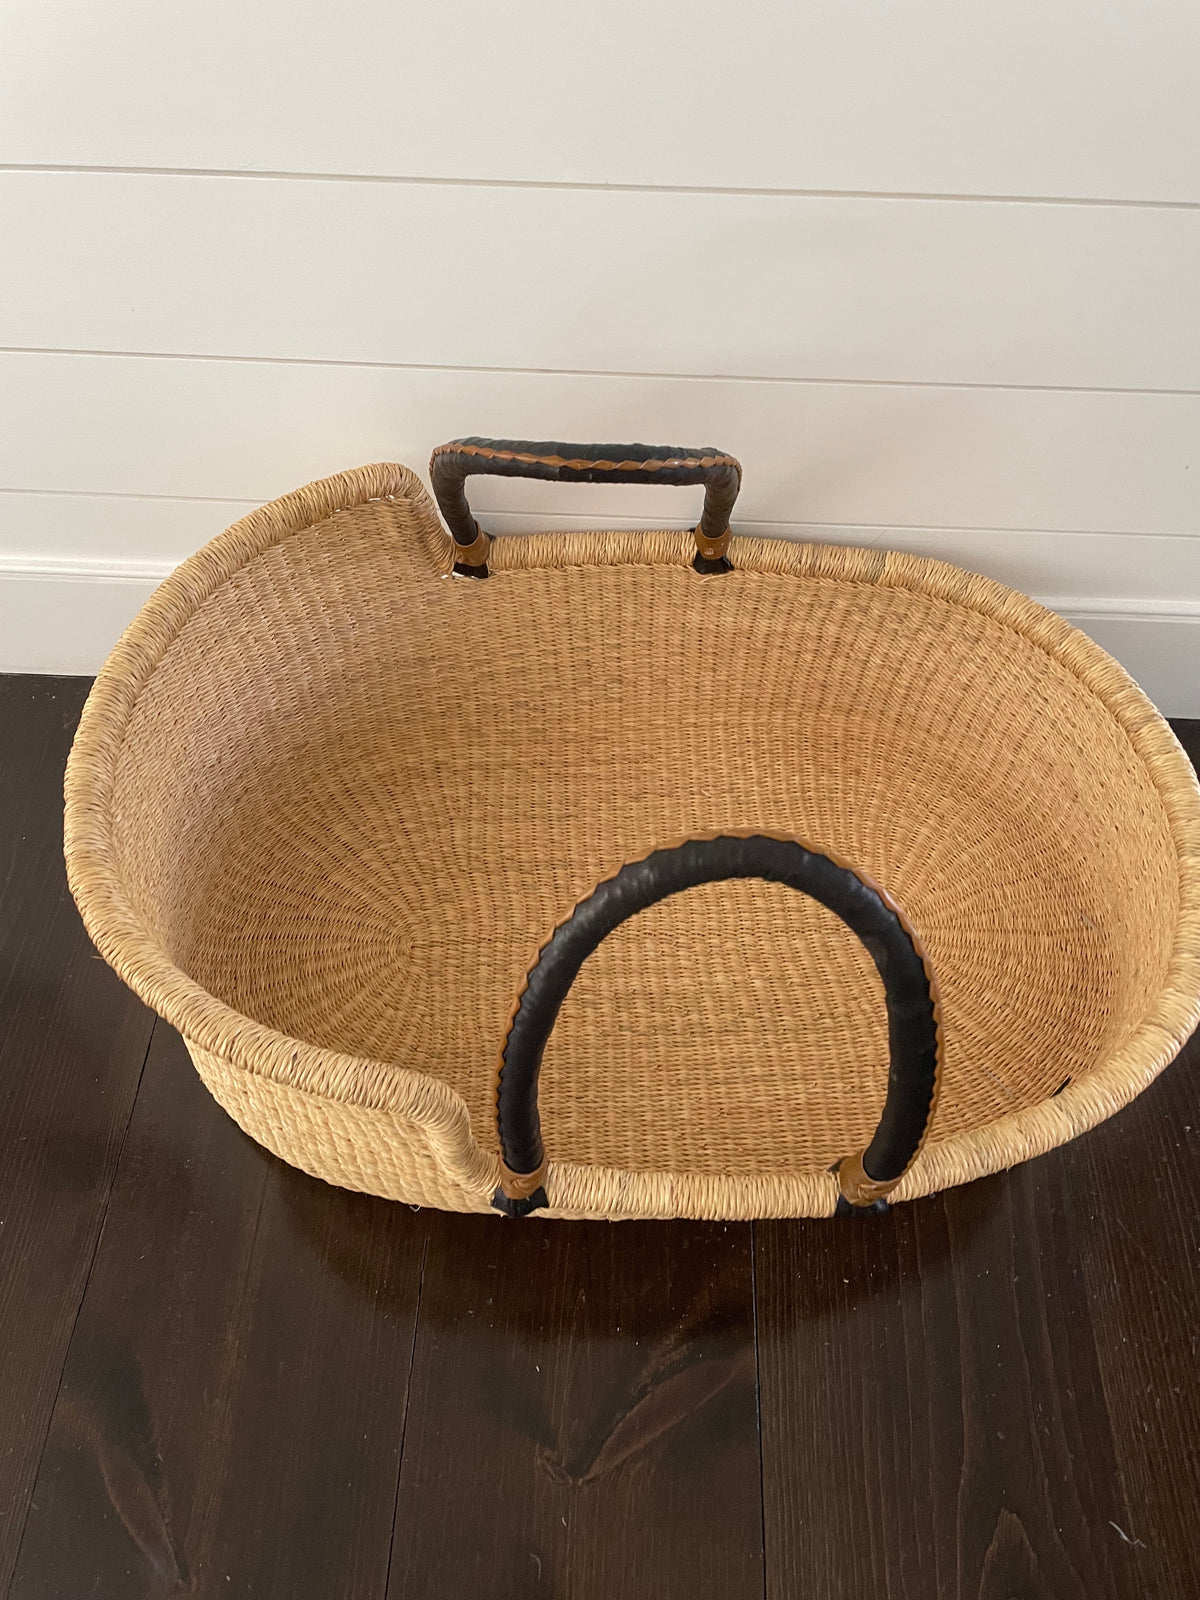 Baby Moses Basket